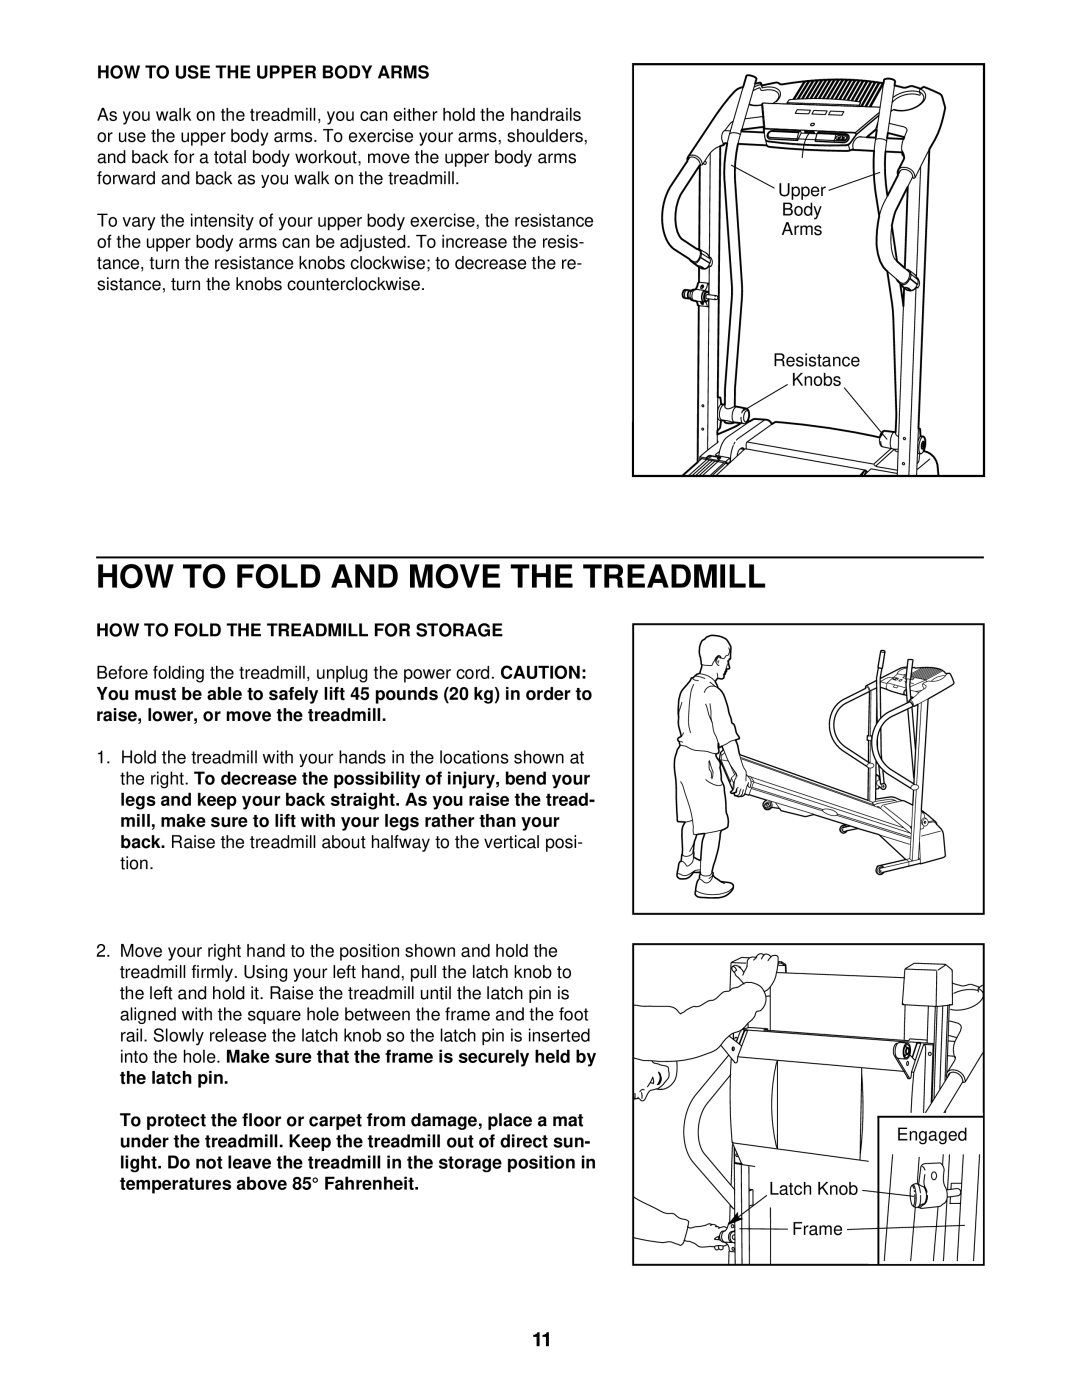 ProForm 831.293230 How To Fold And Move The Treadmill, How To Use The Upper Body Arms, raise, lower, or move the treadmill 